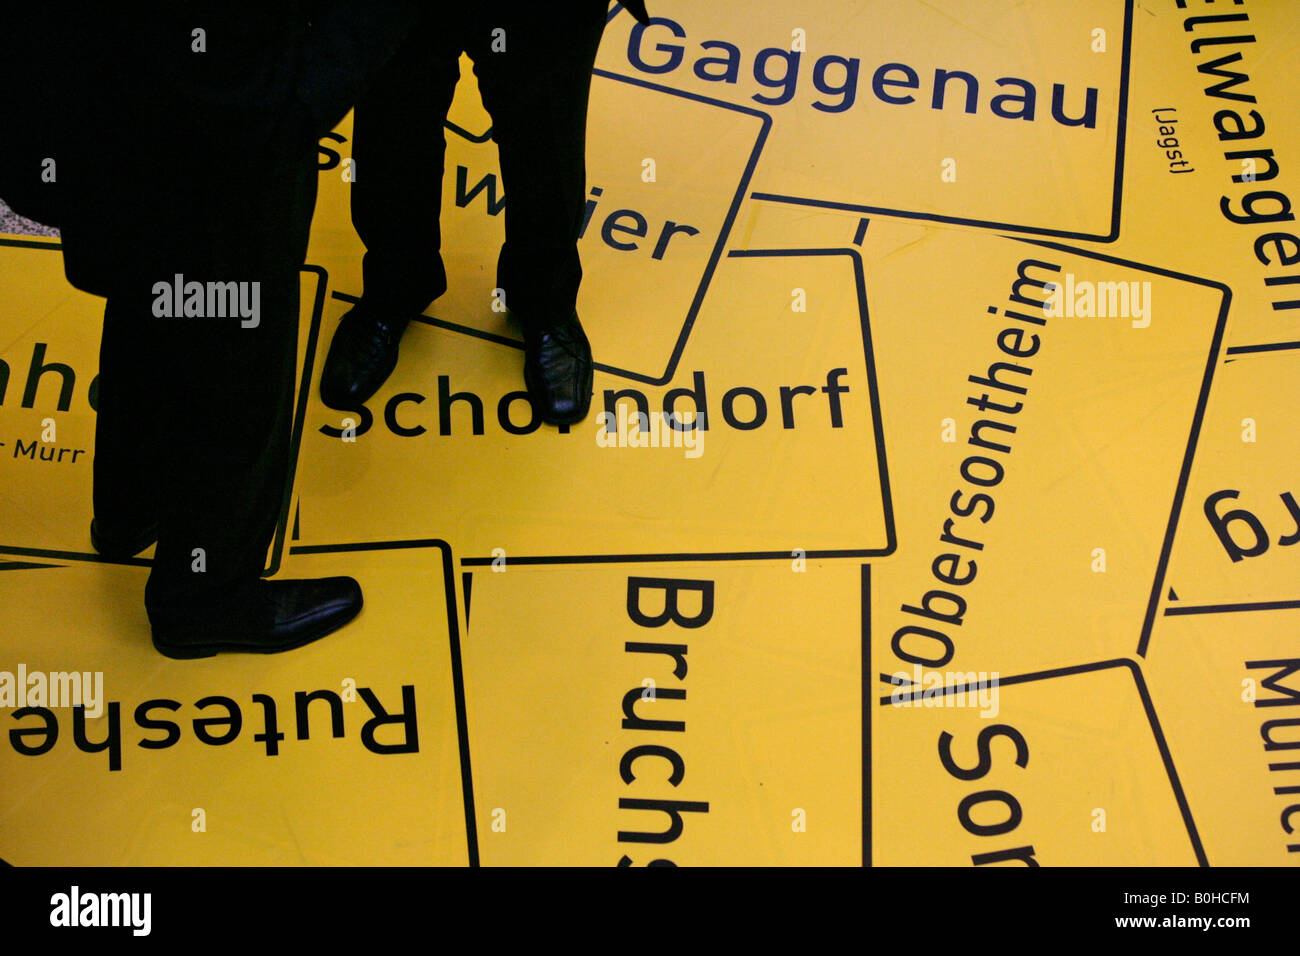 Men standing on an image of town signs of various place names in Baden-Wuerttemberg, Germany Stock Photo